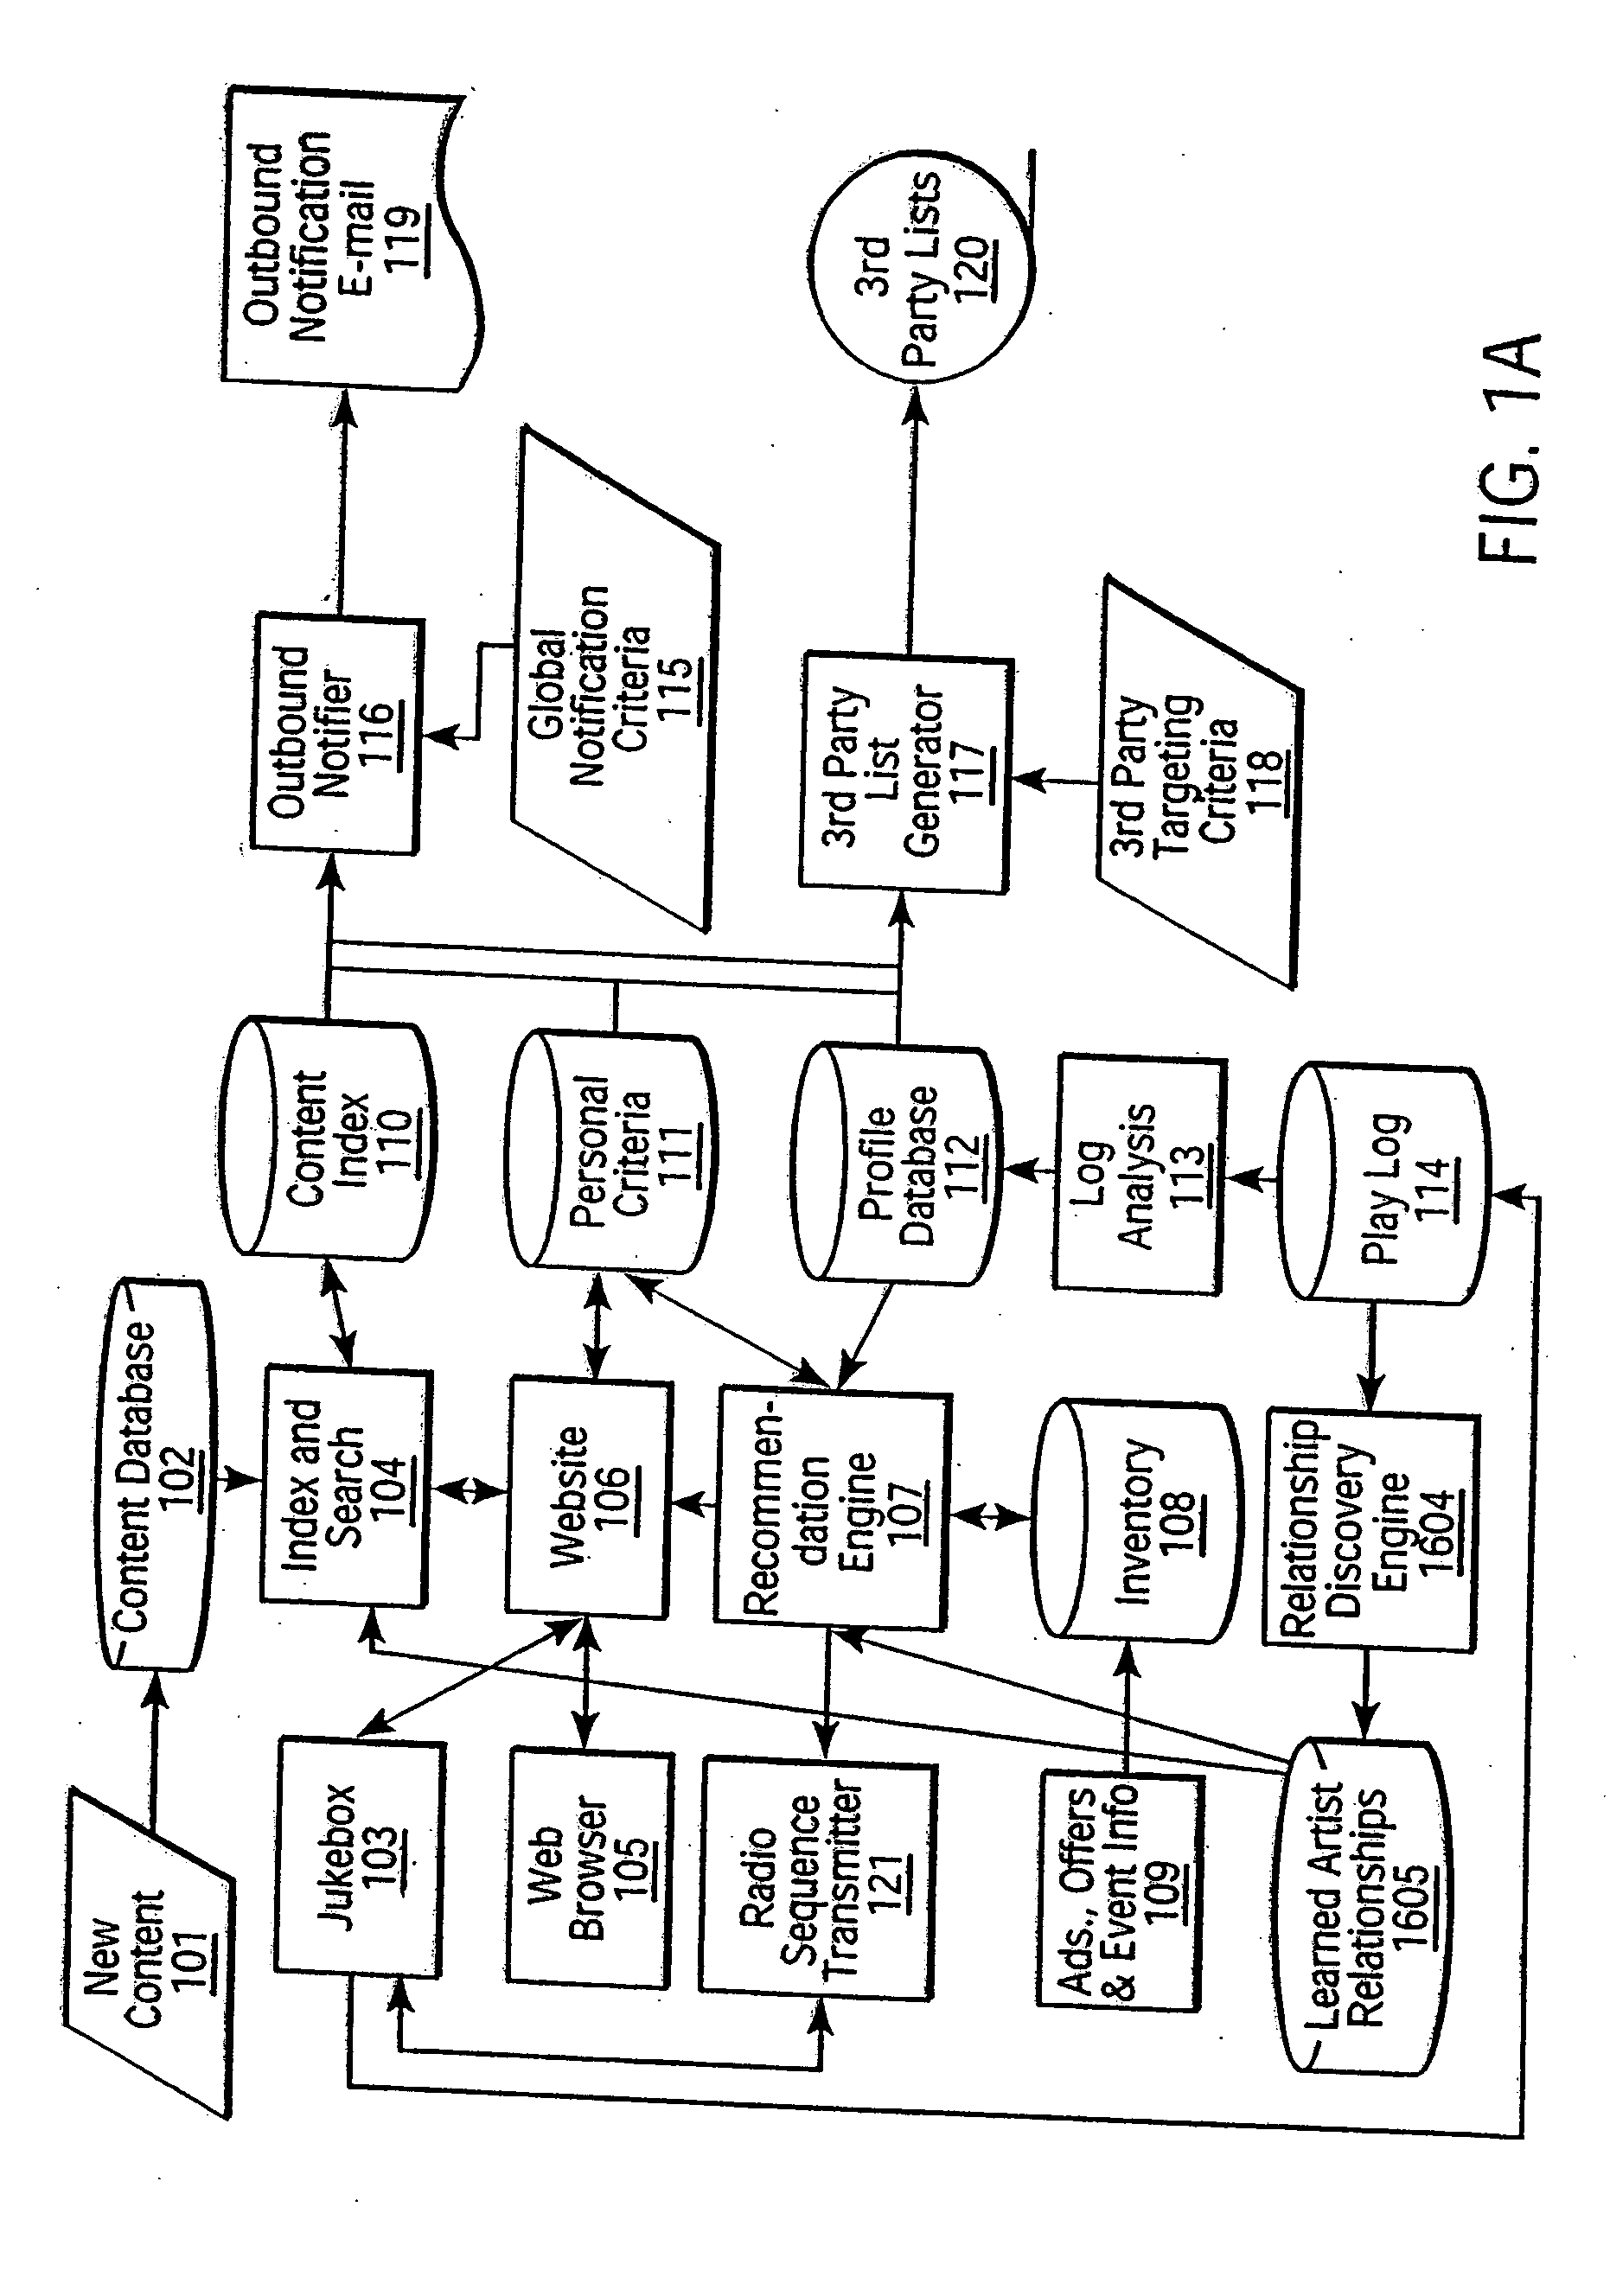 File splitting, scalable coding, and asynchronous transmission in streamed data transfer